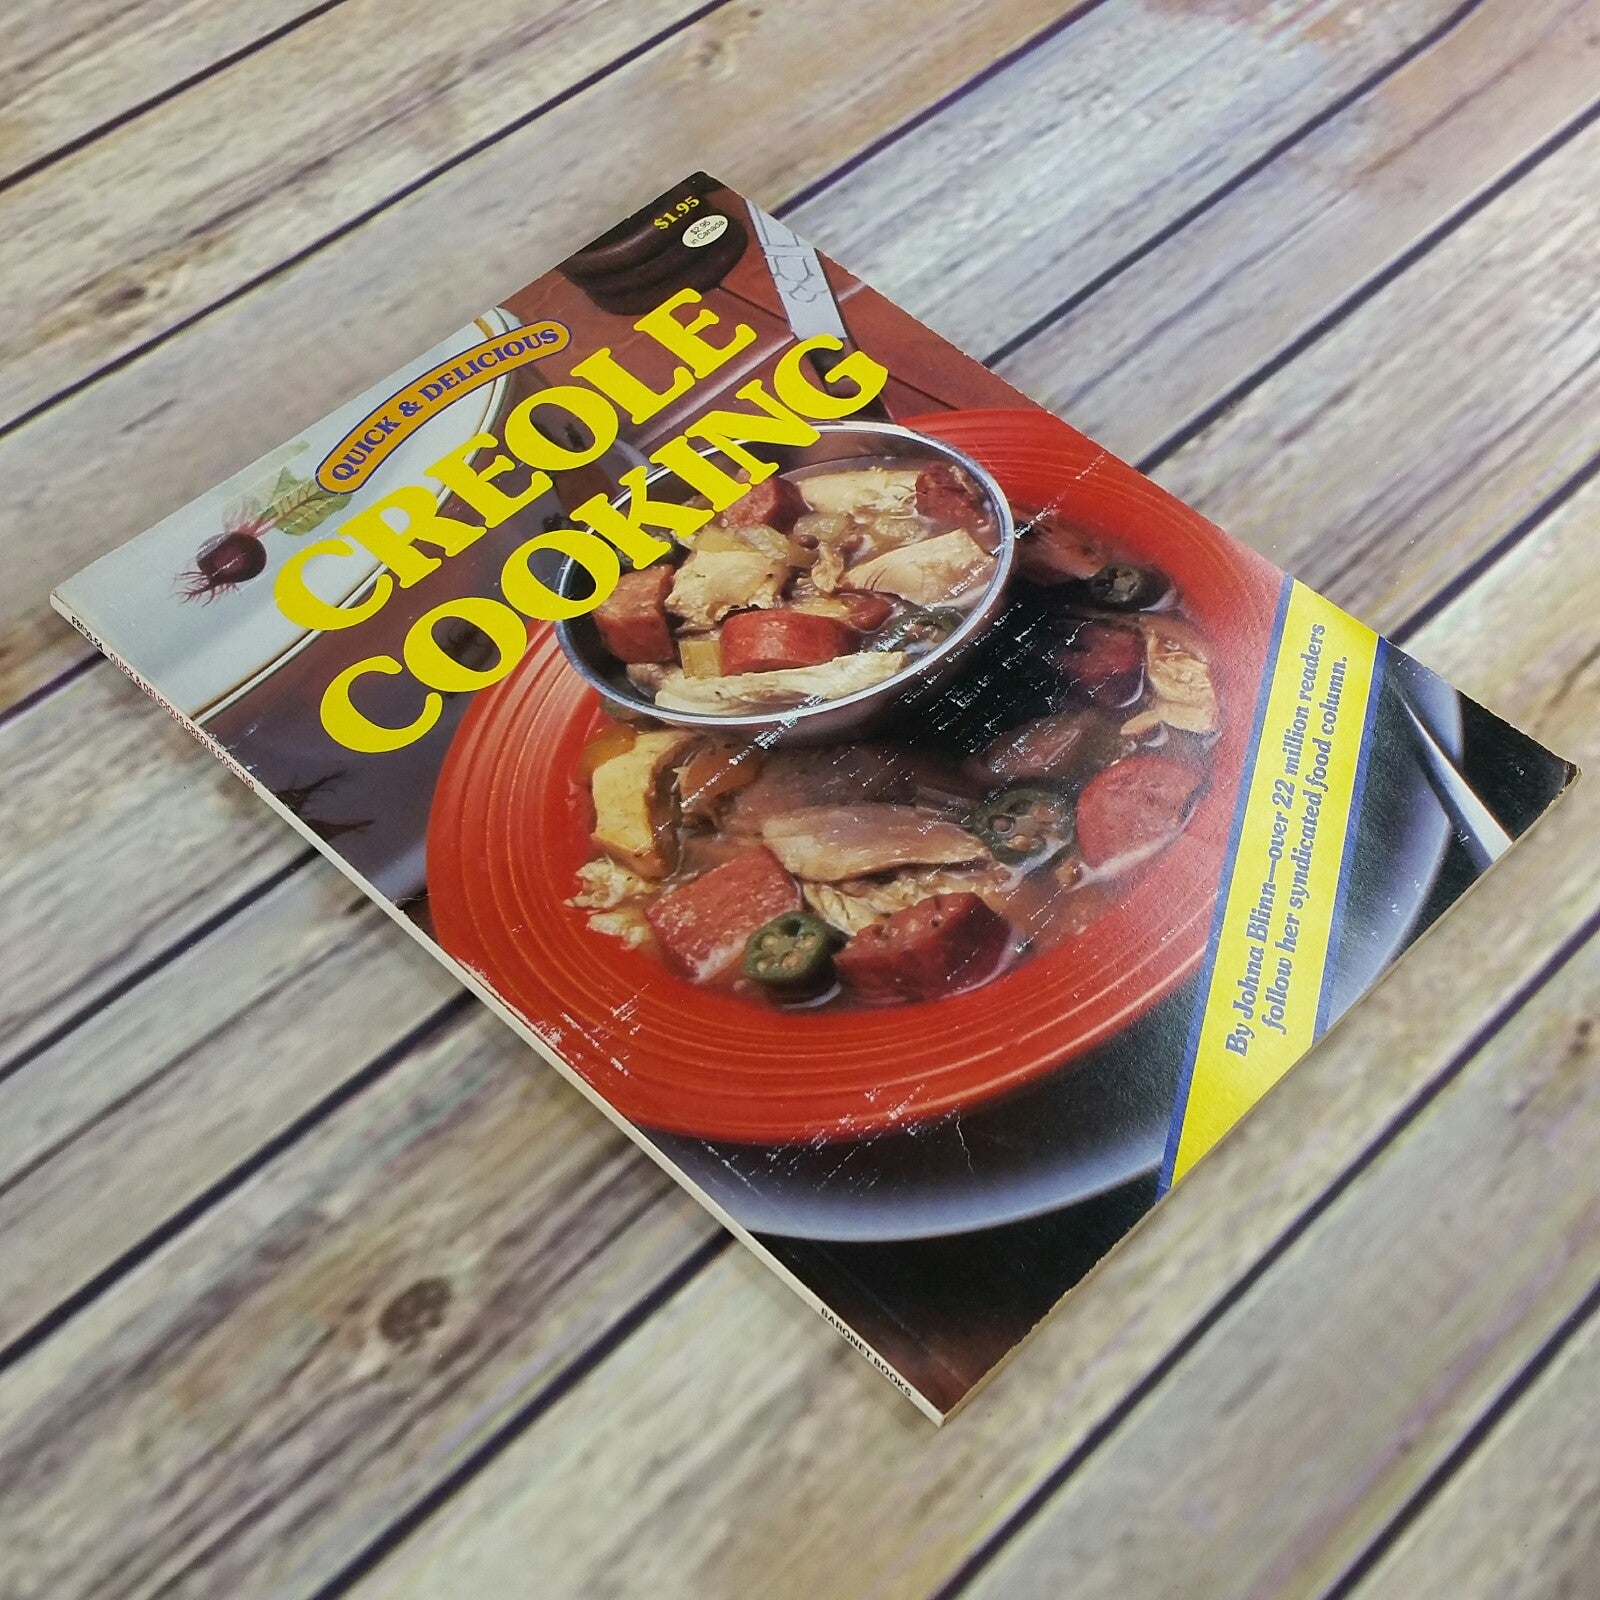 Vintage Cookbook Creole Cooking Recipes Johna Blinn 1989 Paperback Book - At Grandma's Table